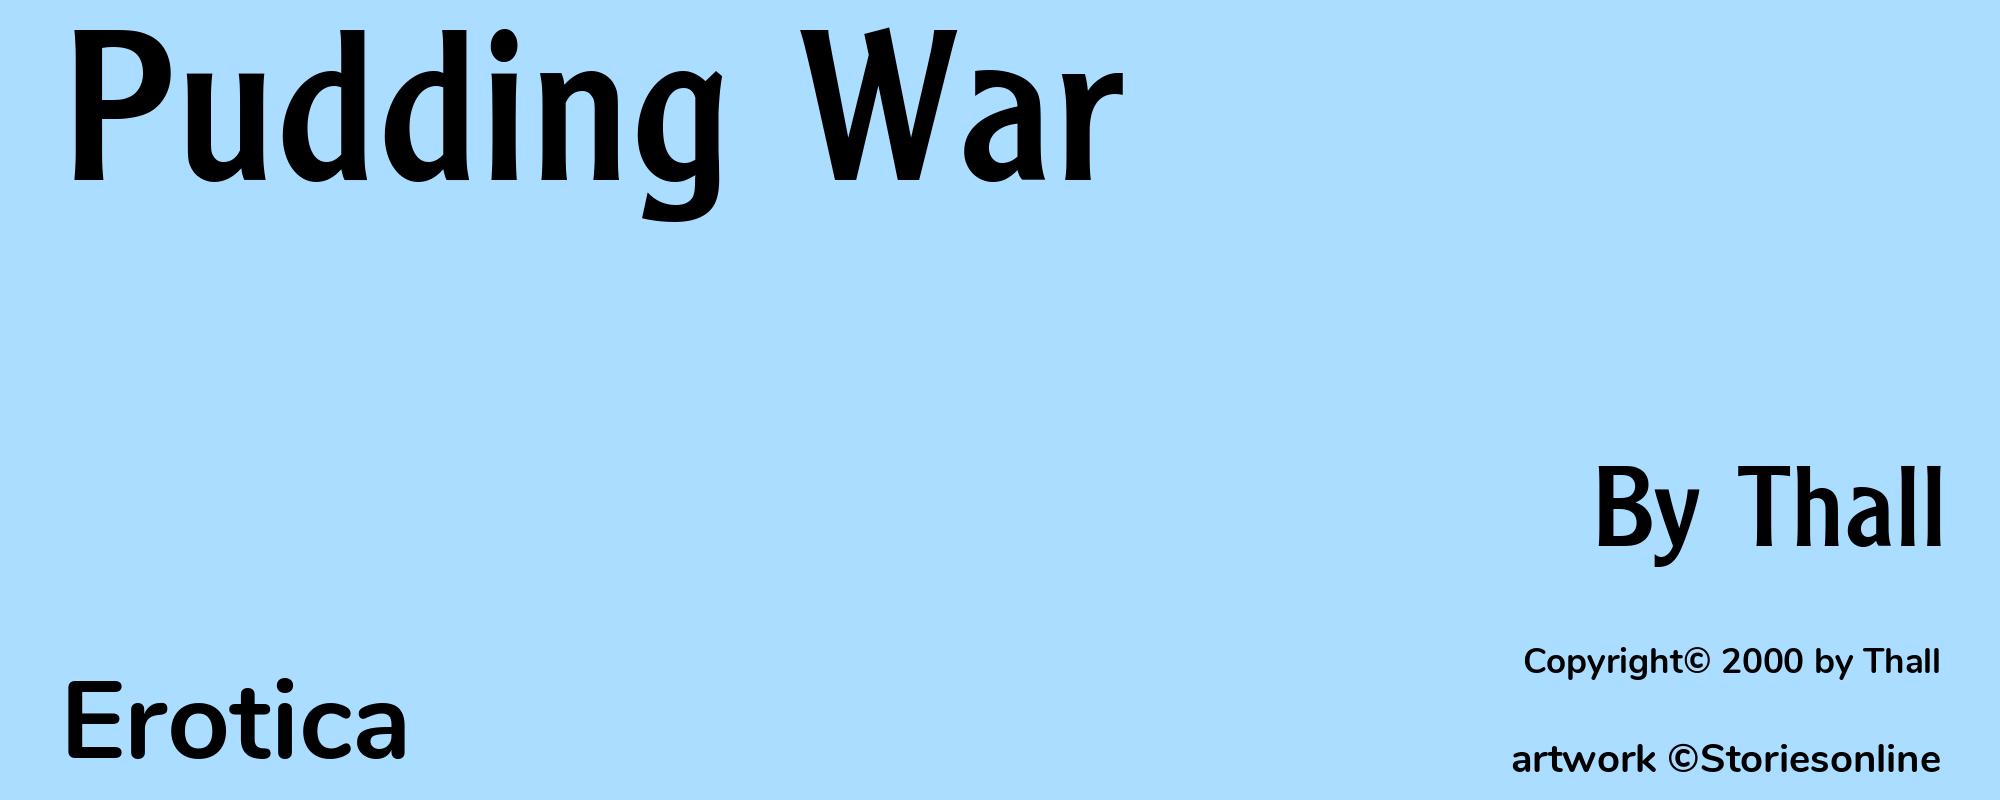 Pudding War - Cover